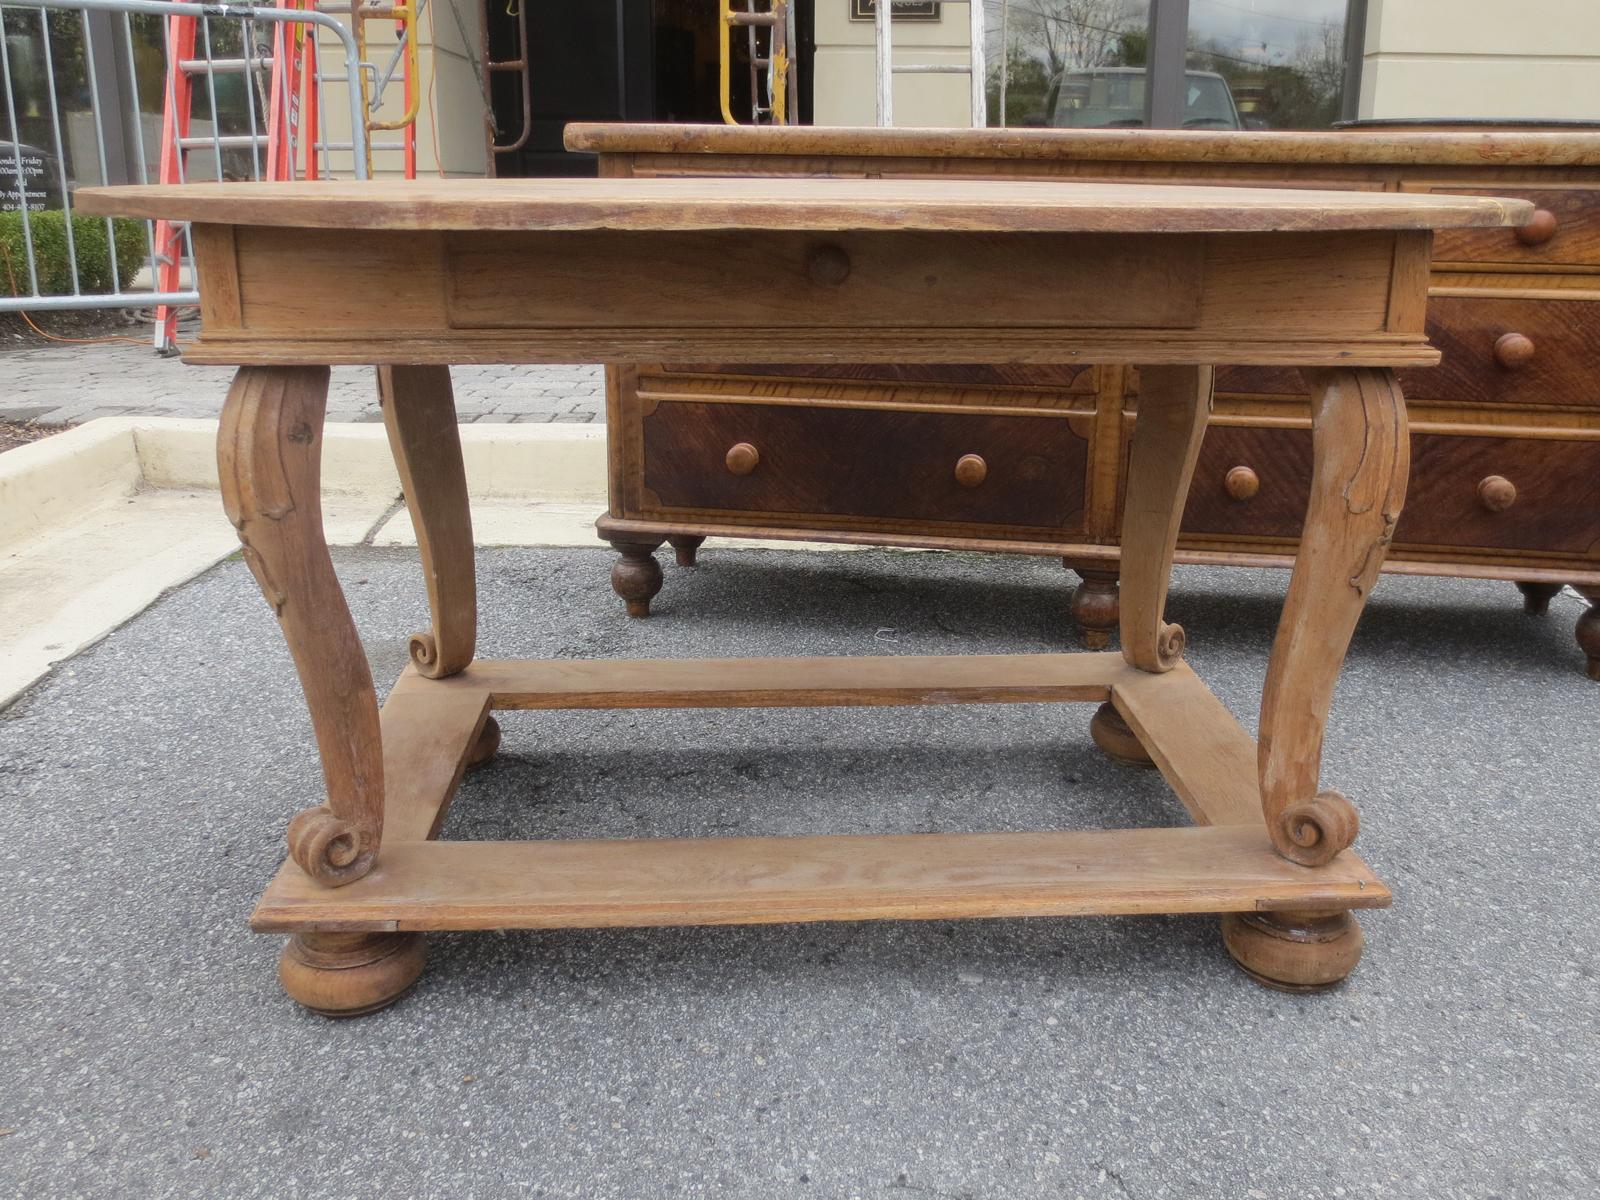 19th century Swedish oval center table
One drawer.